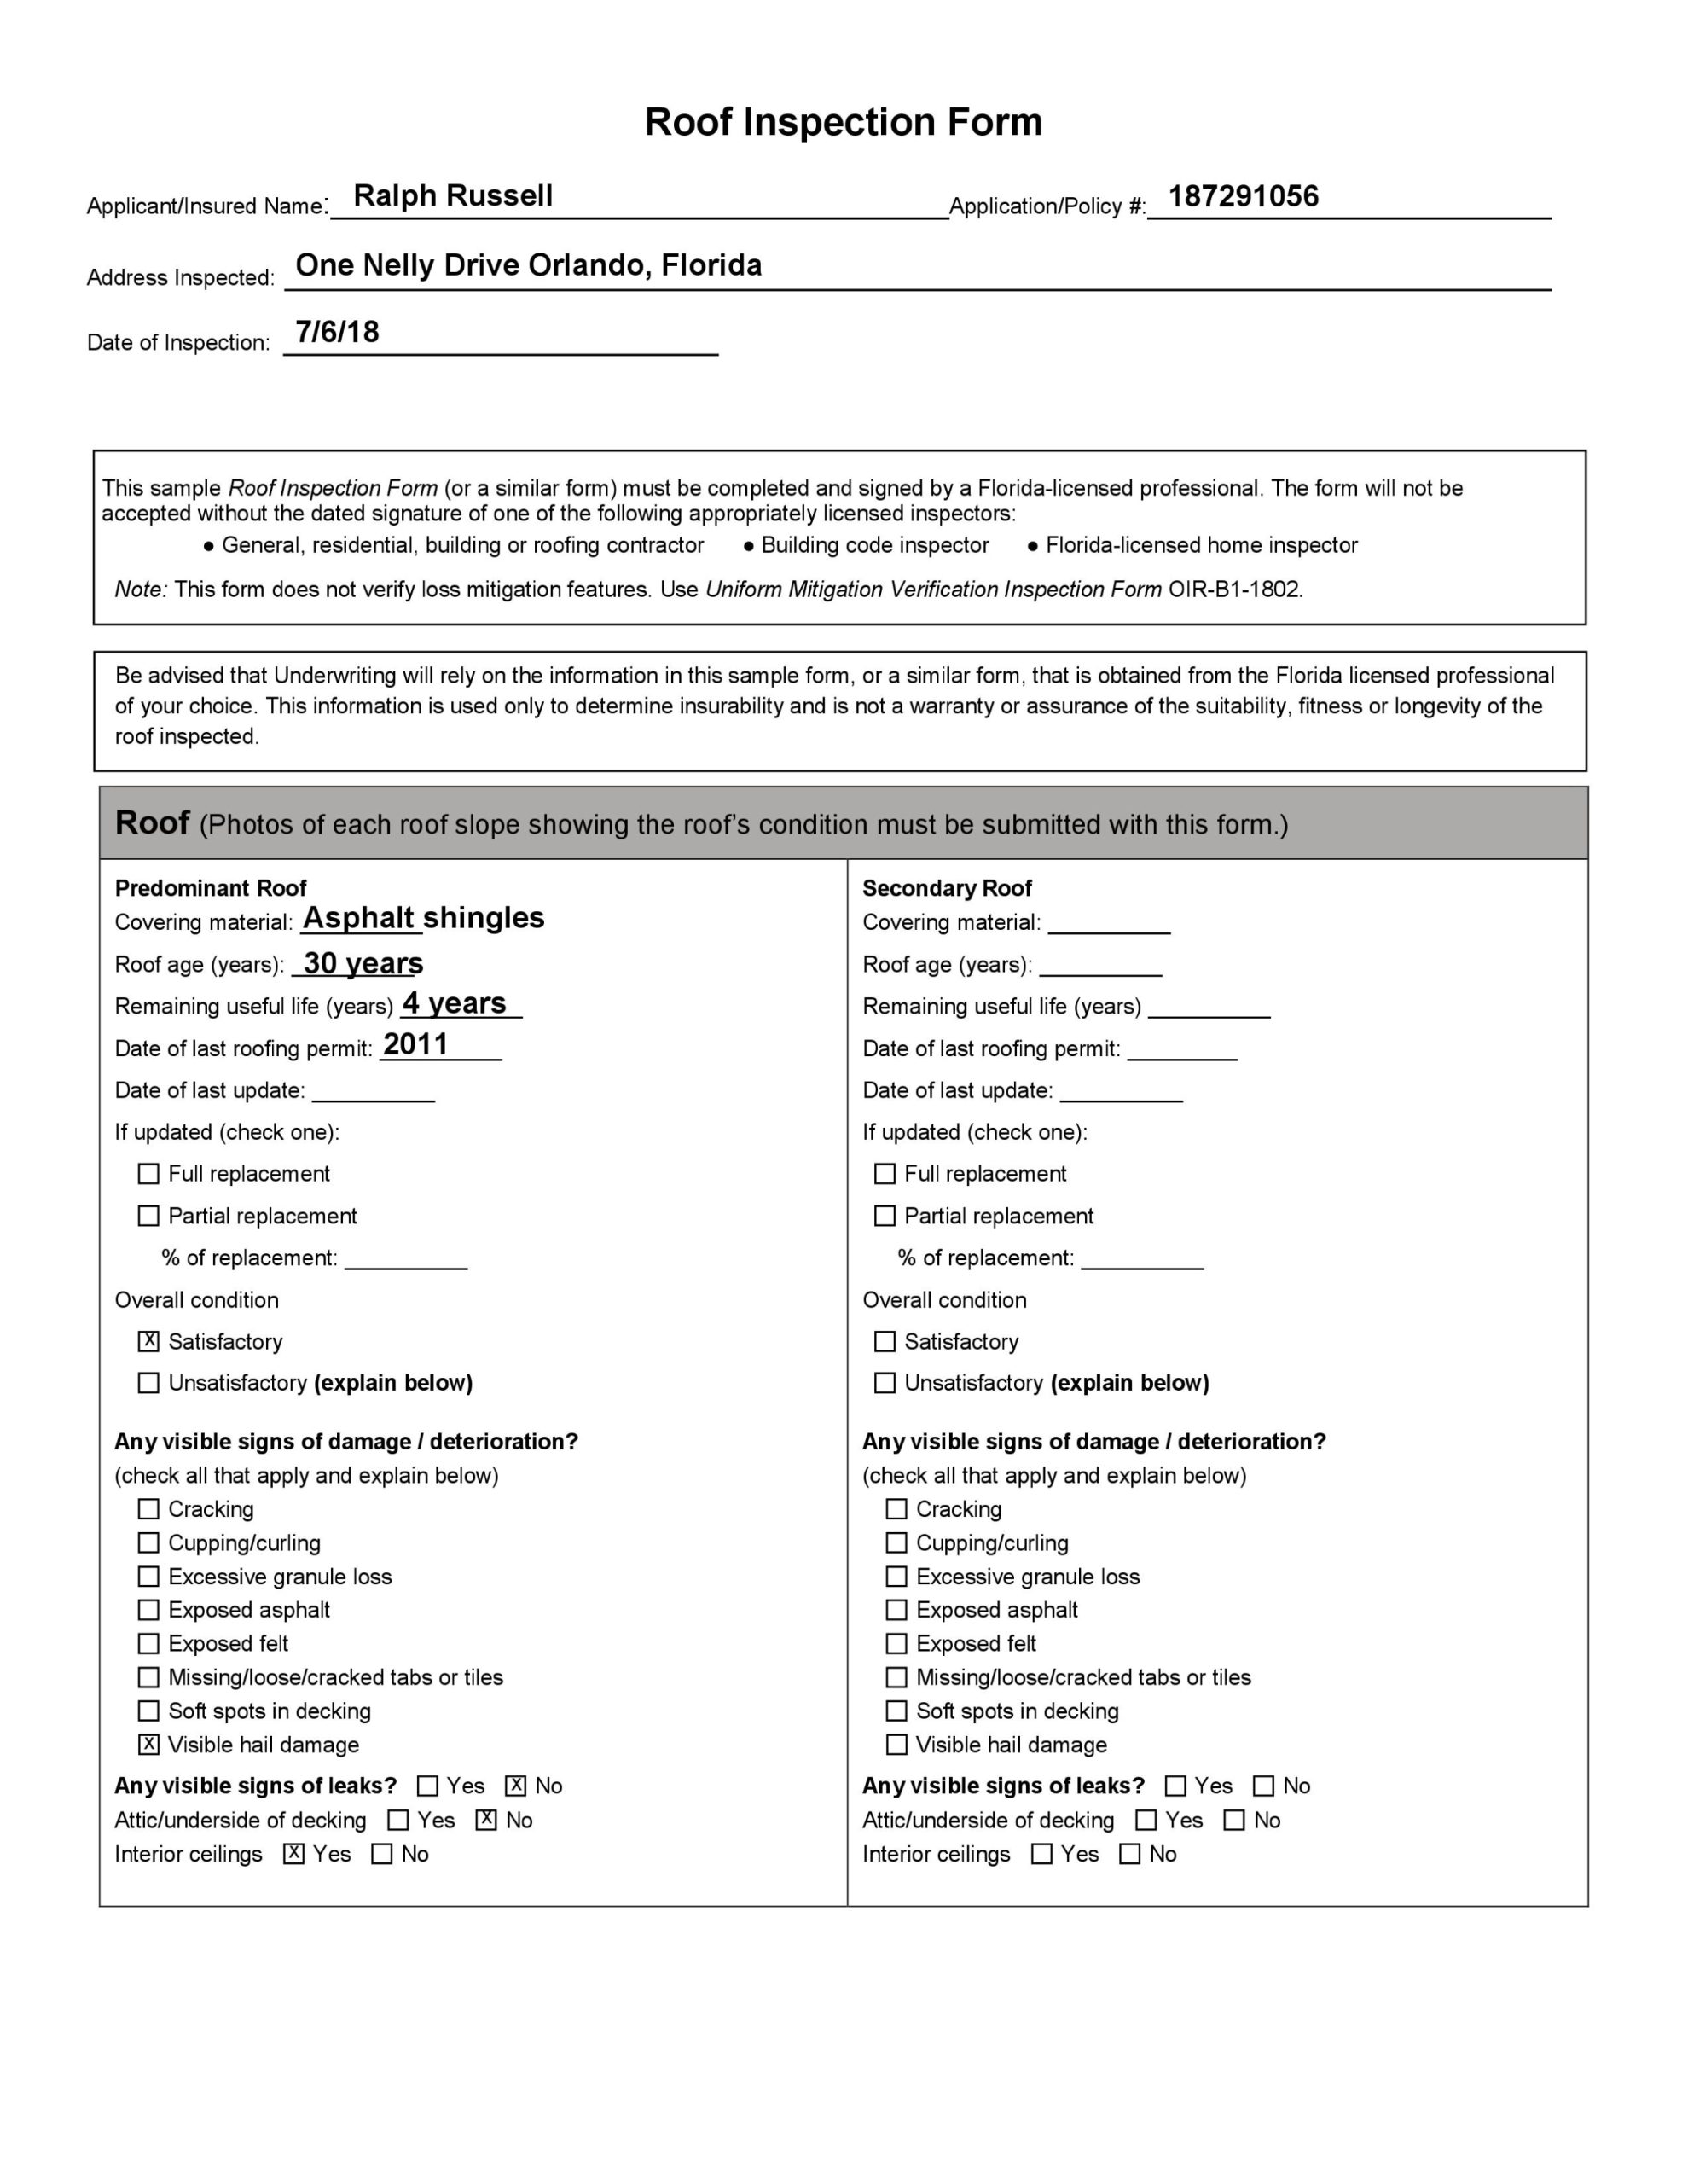 Citizens Roof Inspection Form From Spectacular Inspection System Within Roof Inspection Report Template